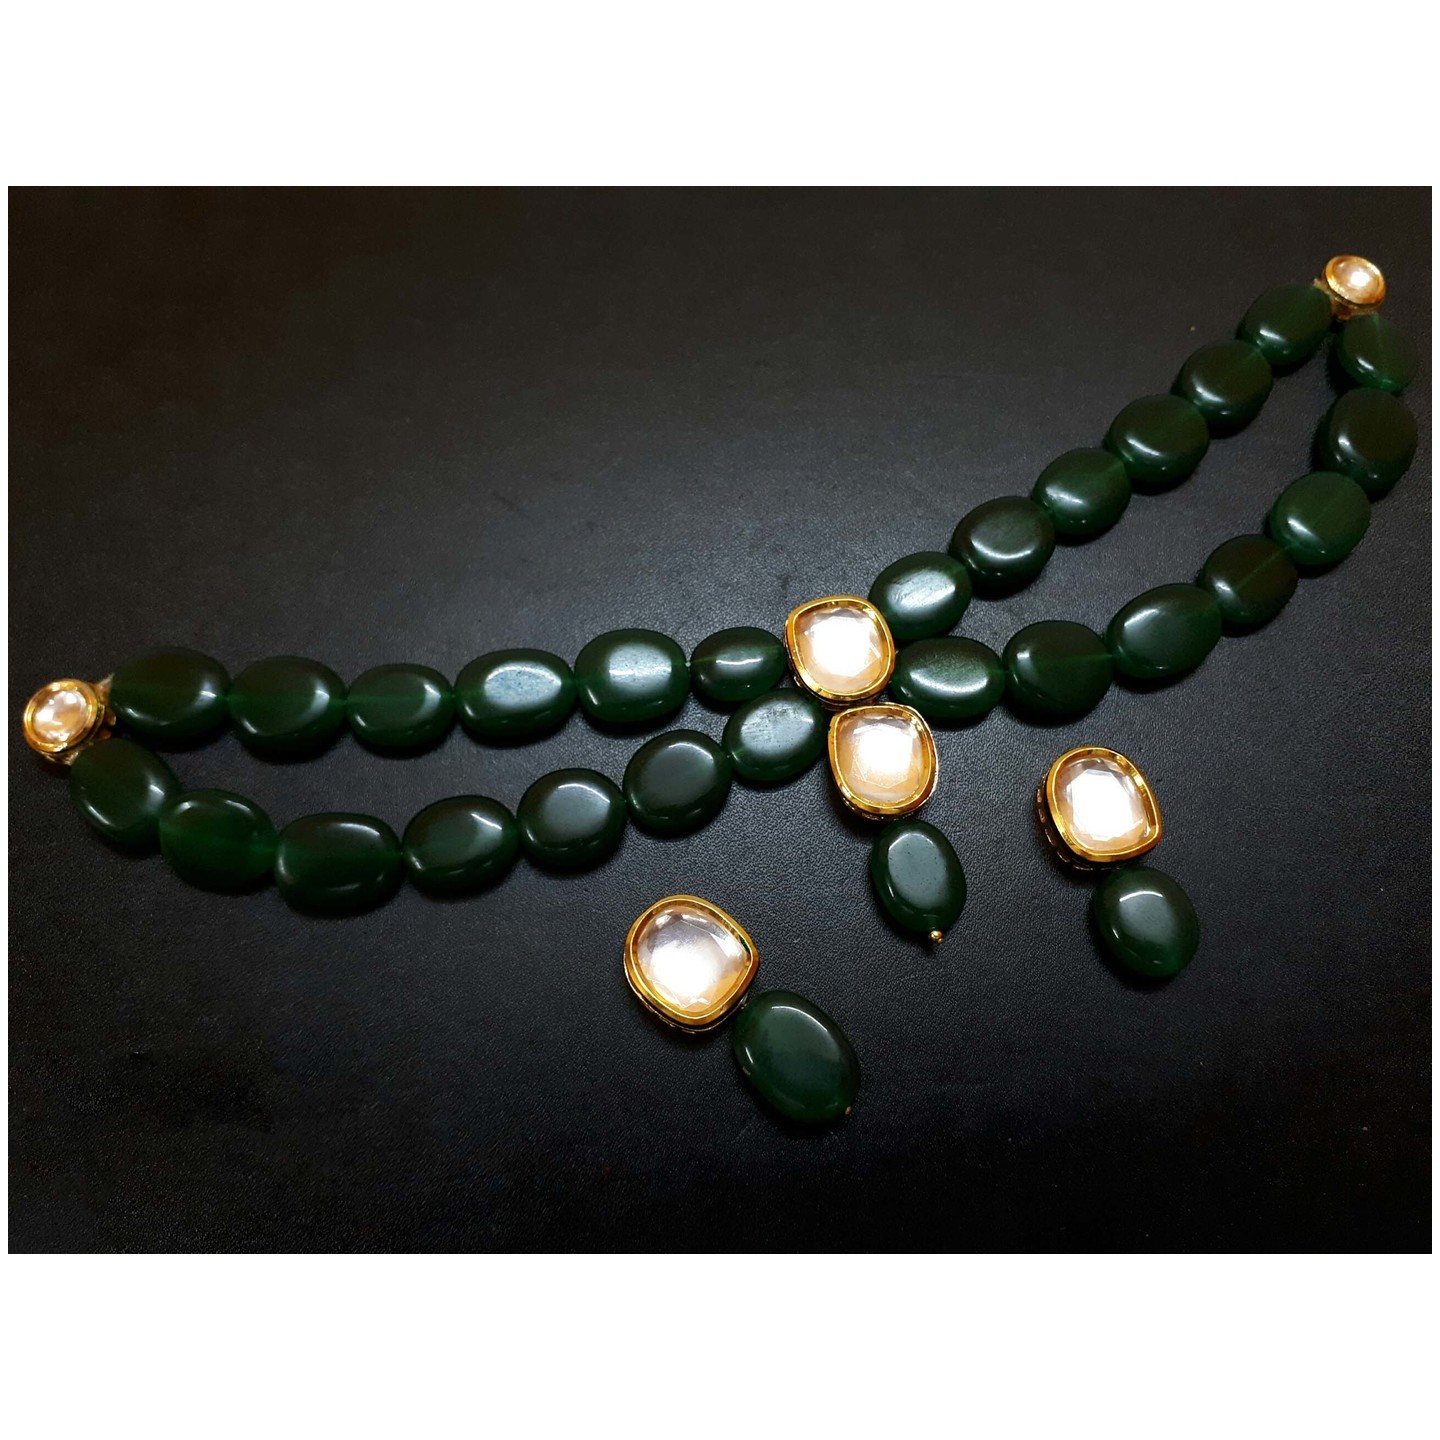 Green Gold Tone Kundan Necklace Set With Earring Onyx Pearls